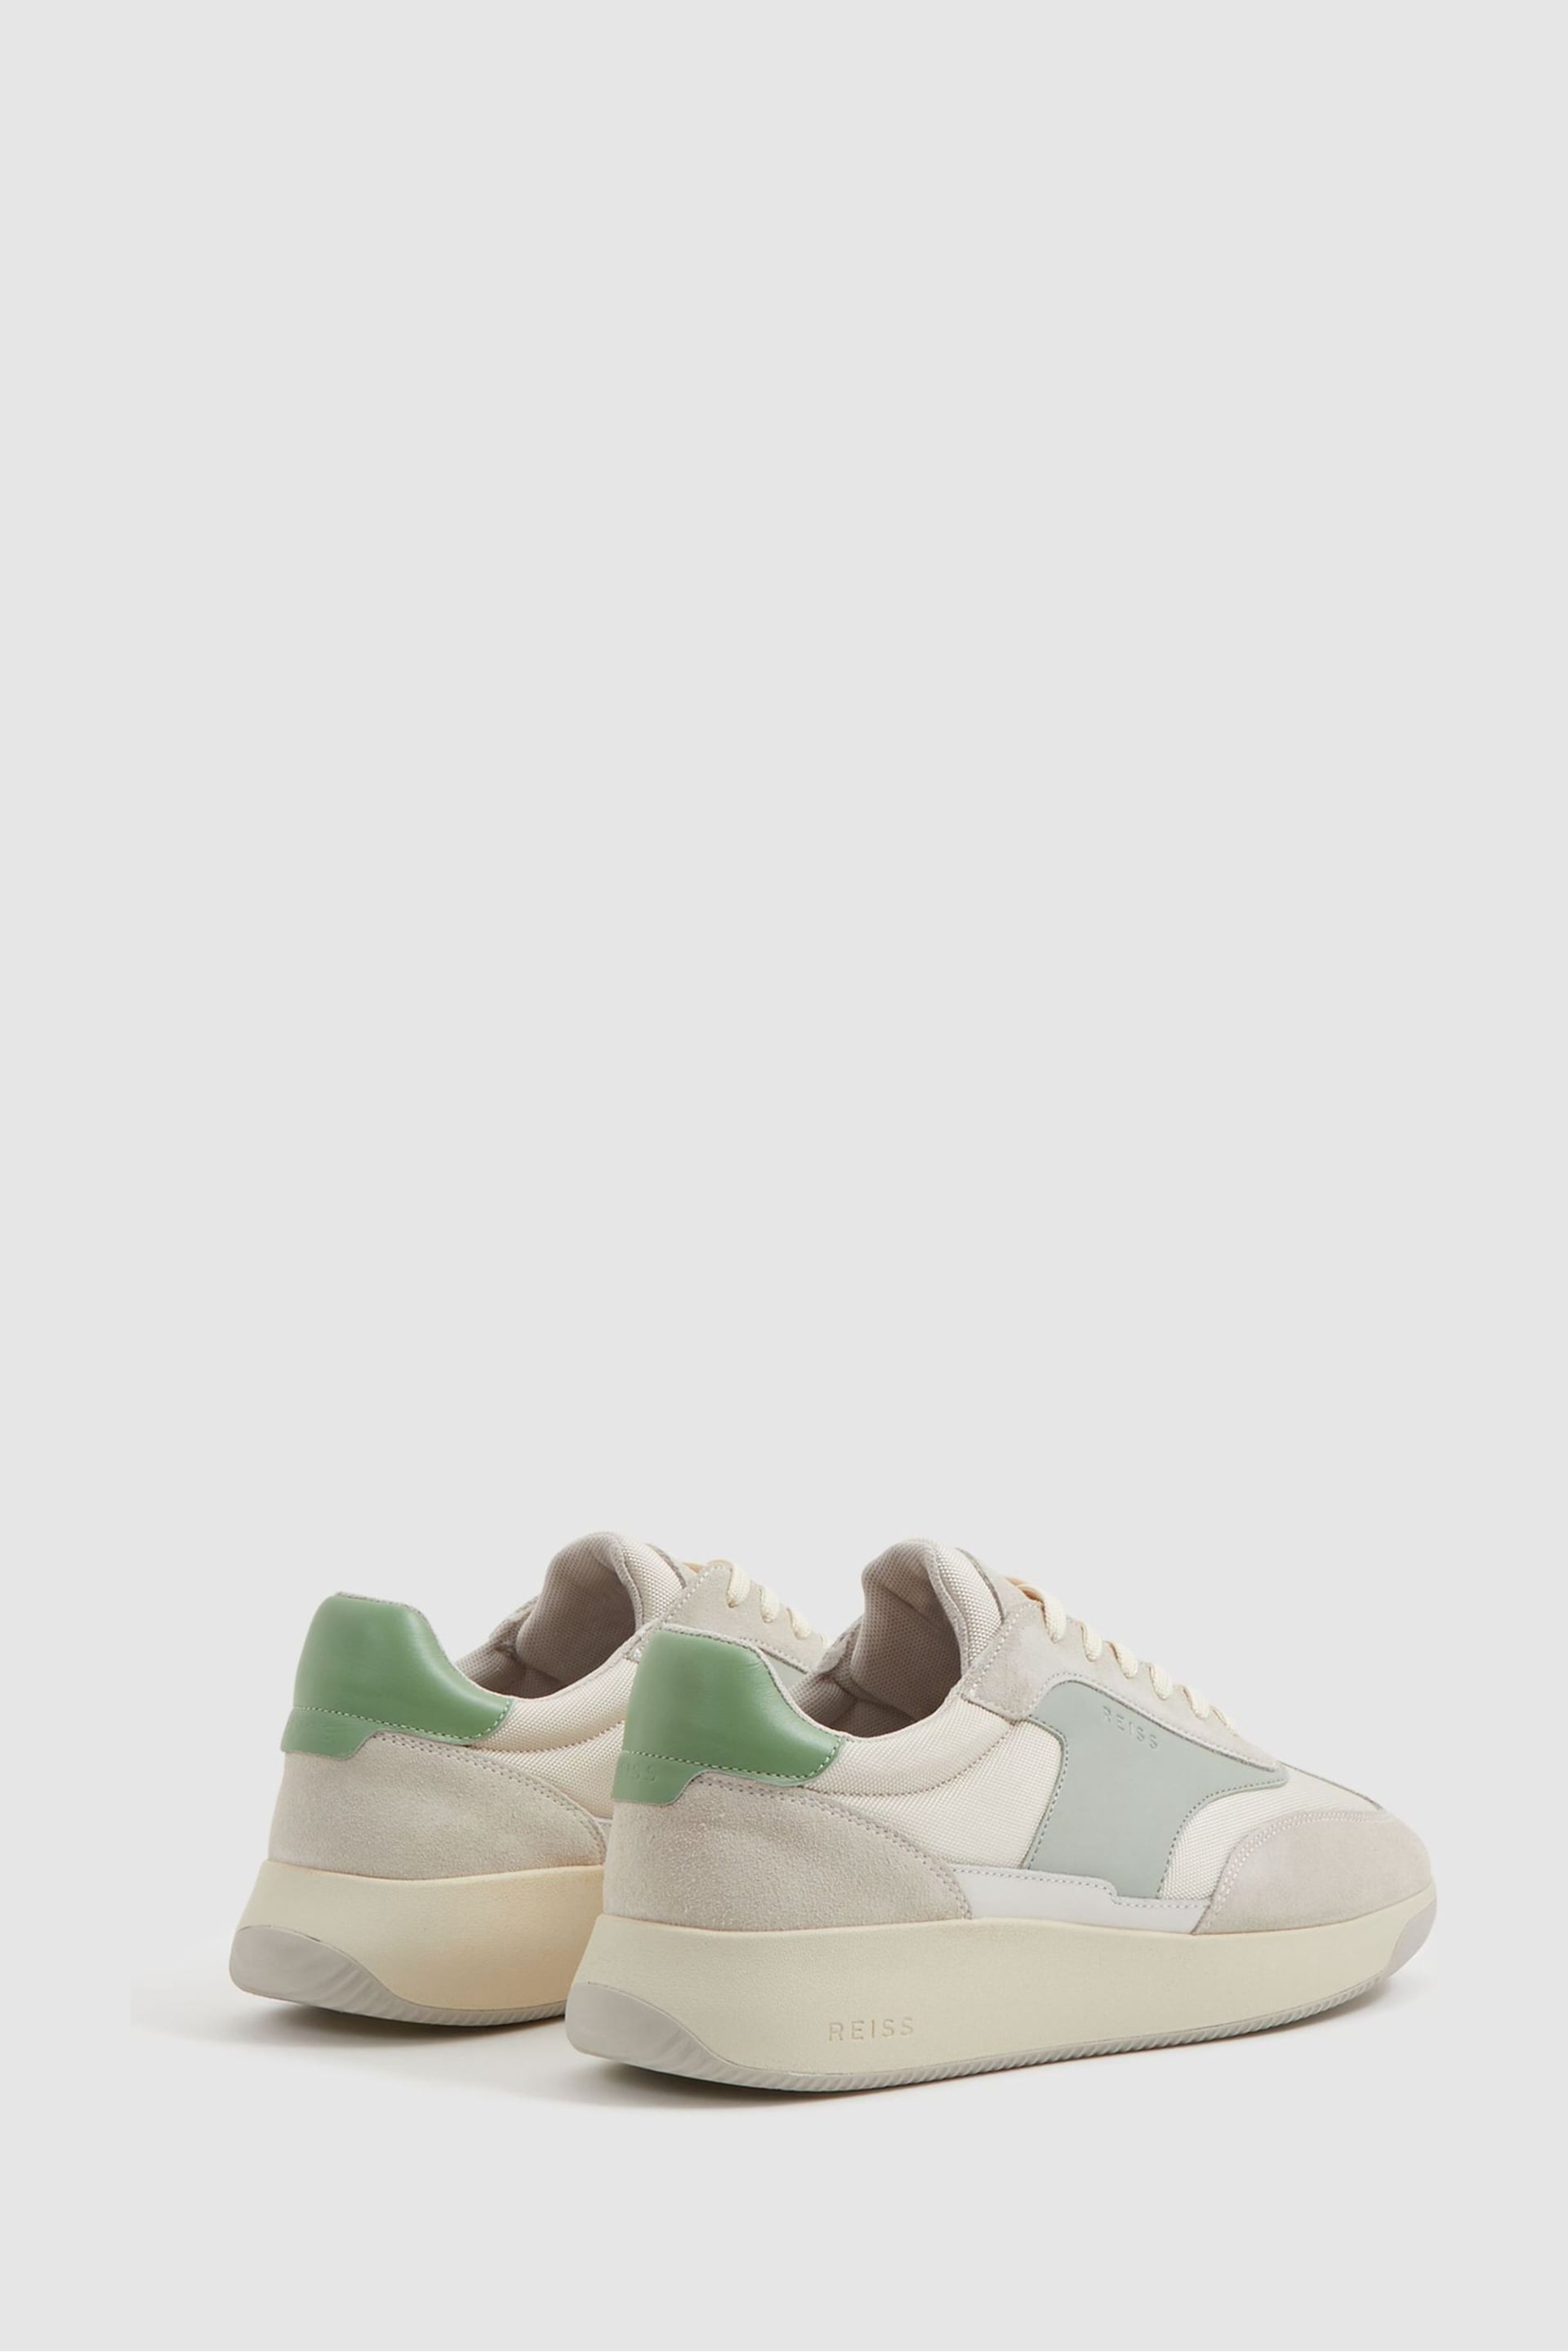 Reiss Pistachio/White Emmett Leather Suede Running Trainers - Image 2 of 4